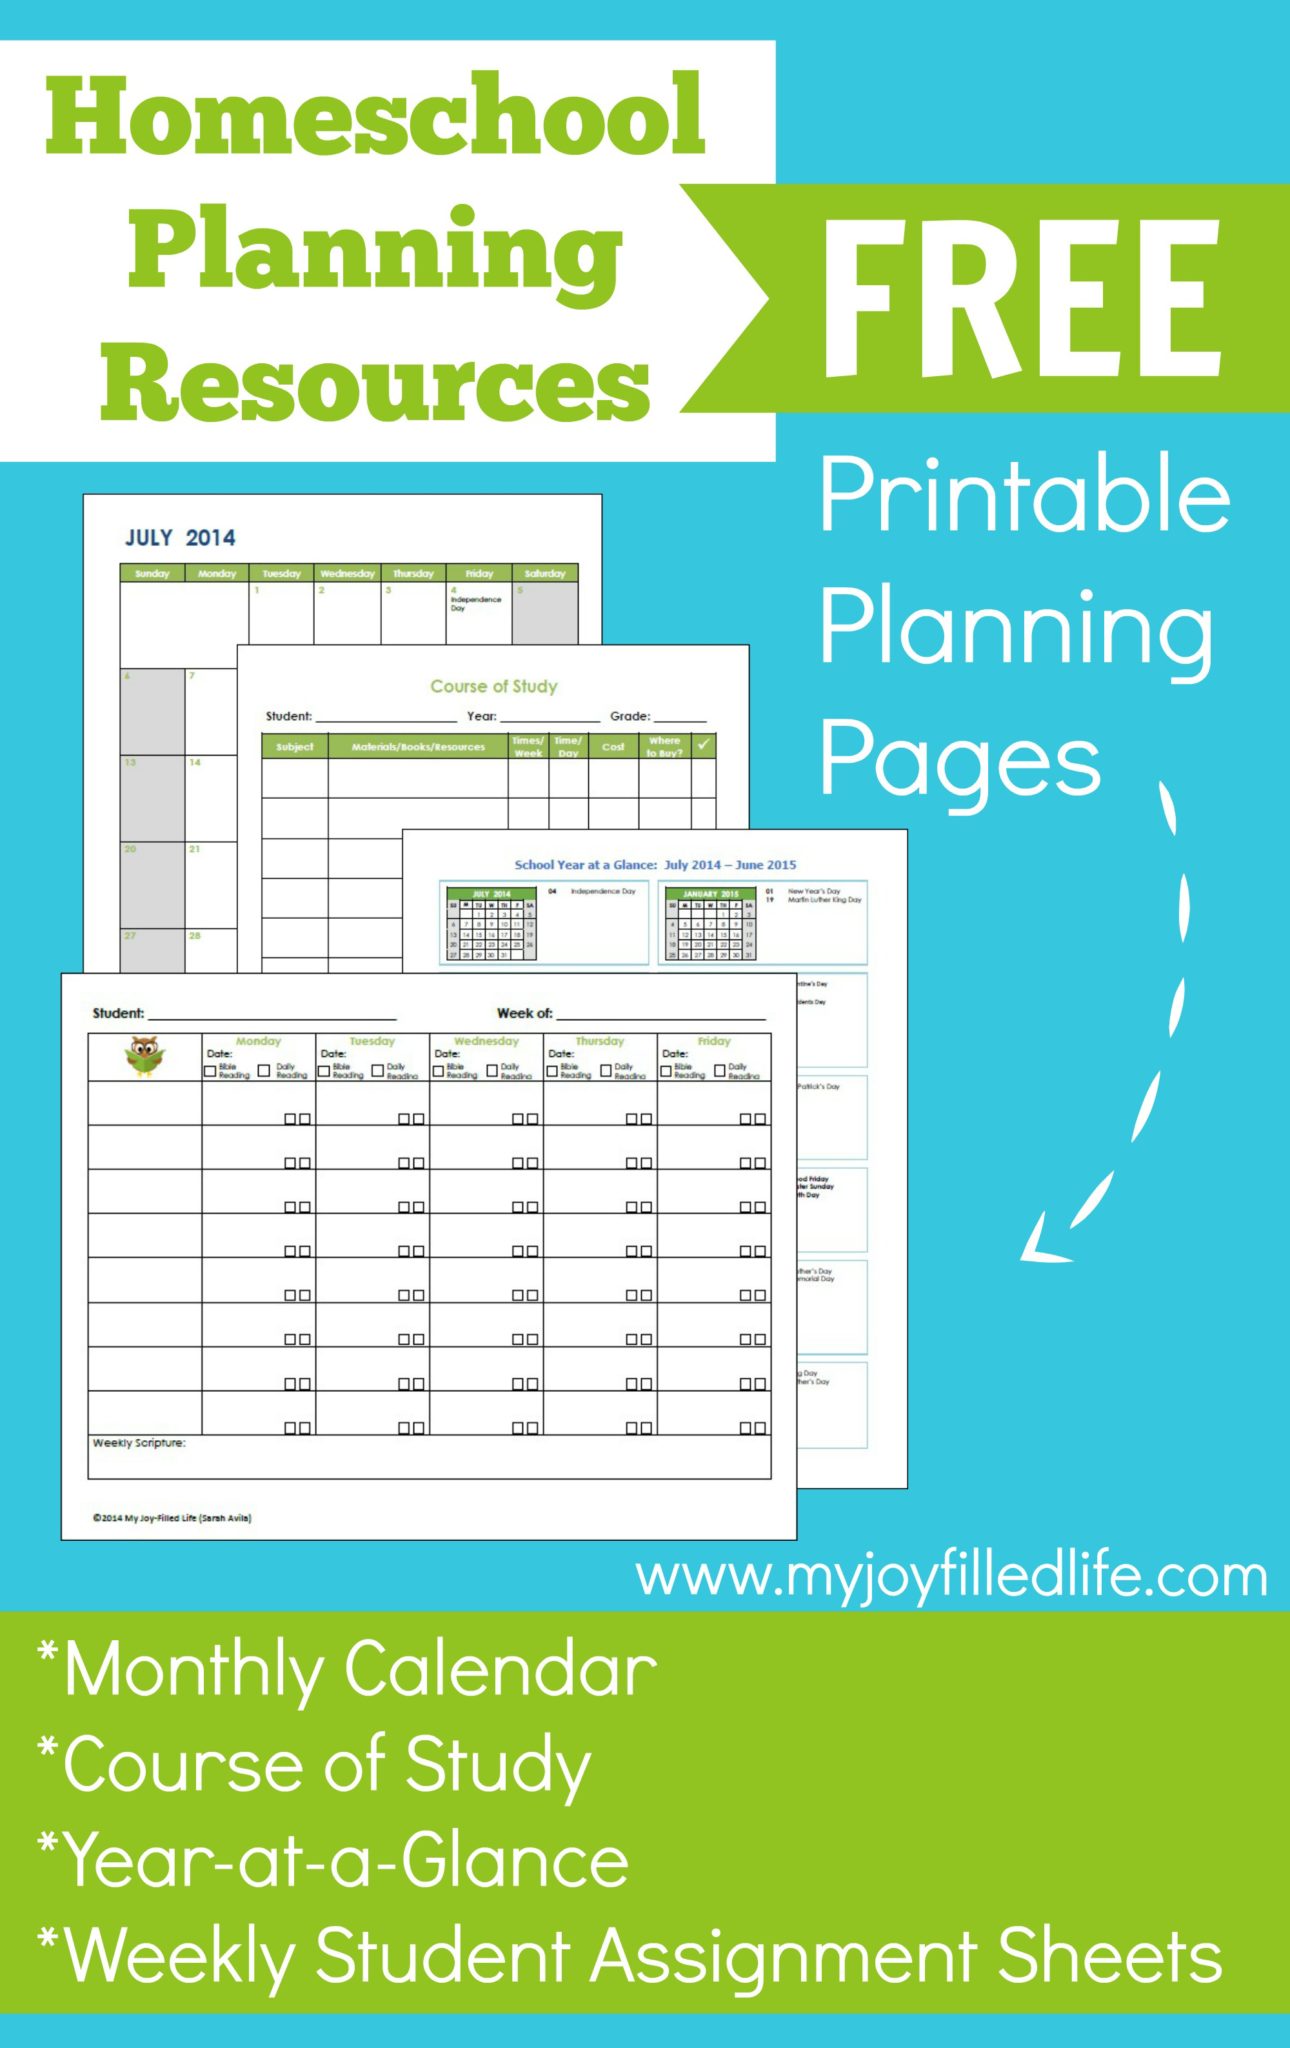 homeschool-planning-resources-free-printables-my-joy-filled-life